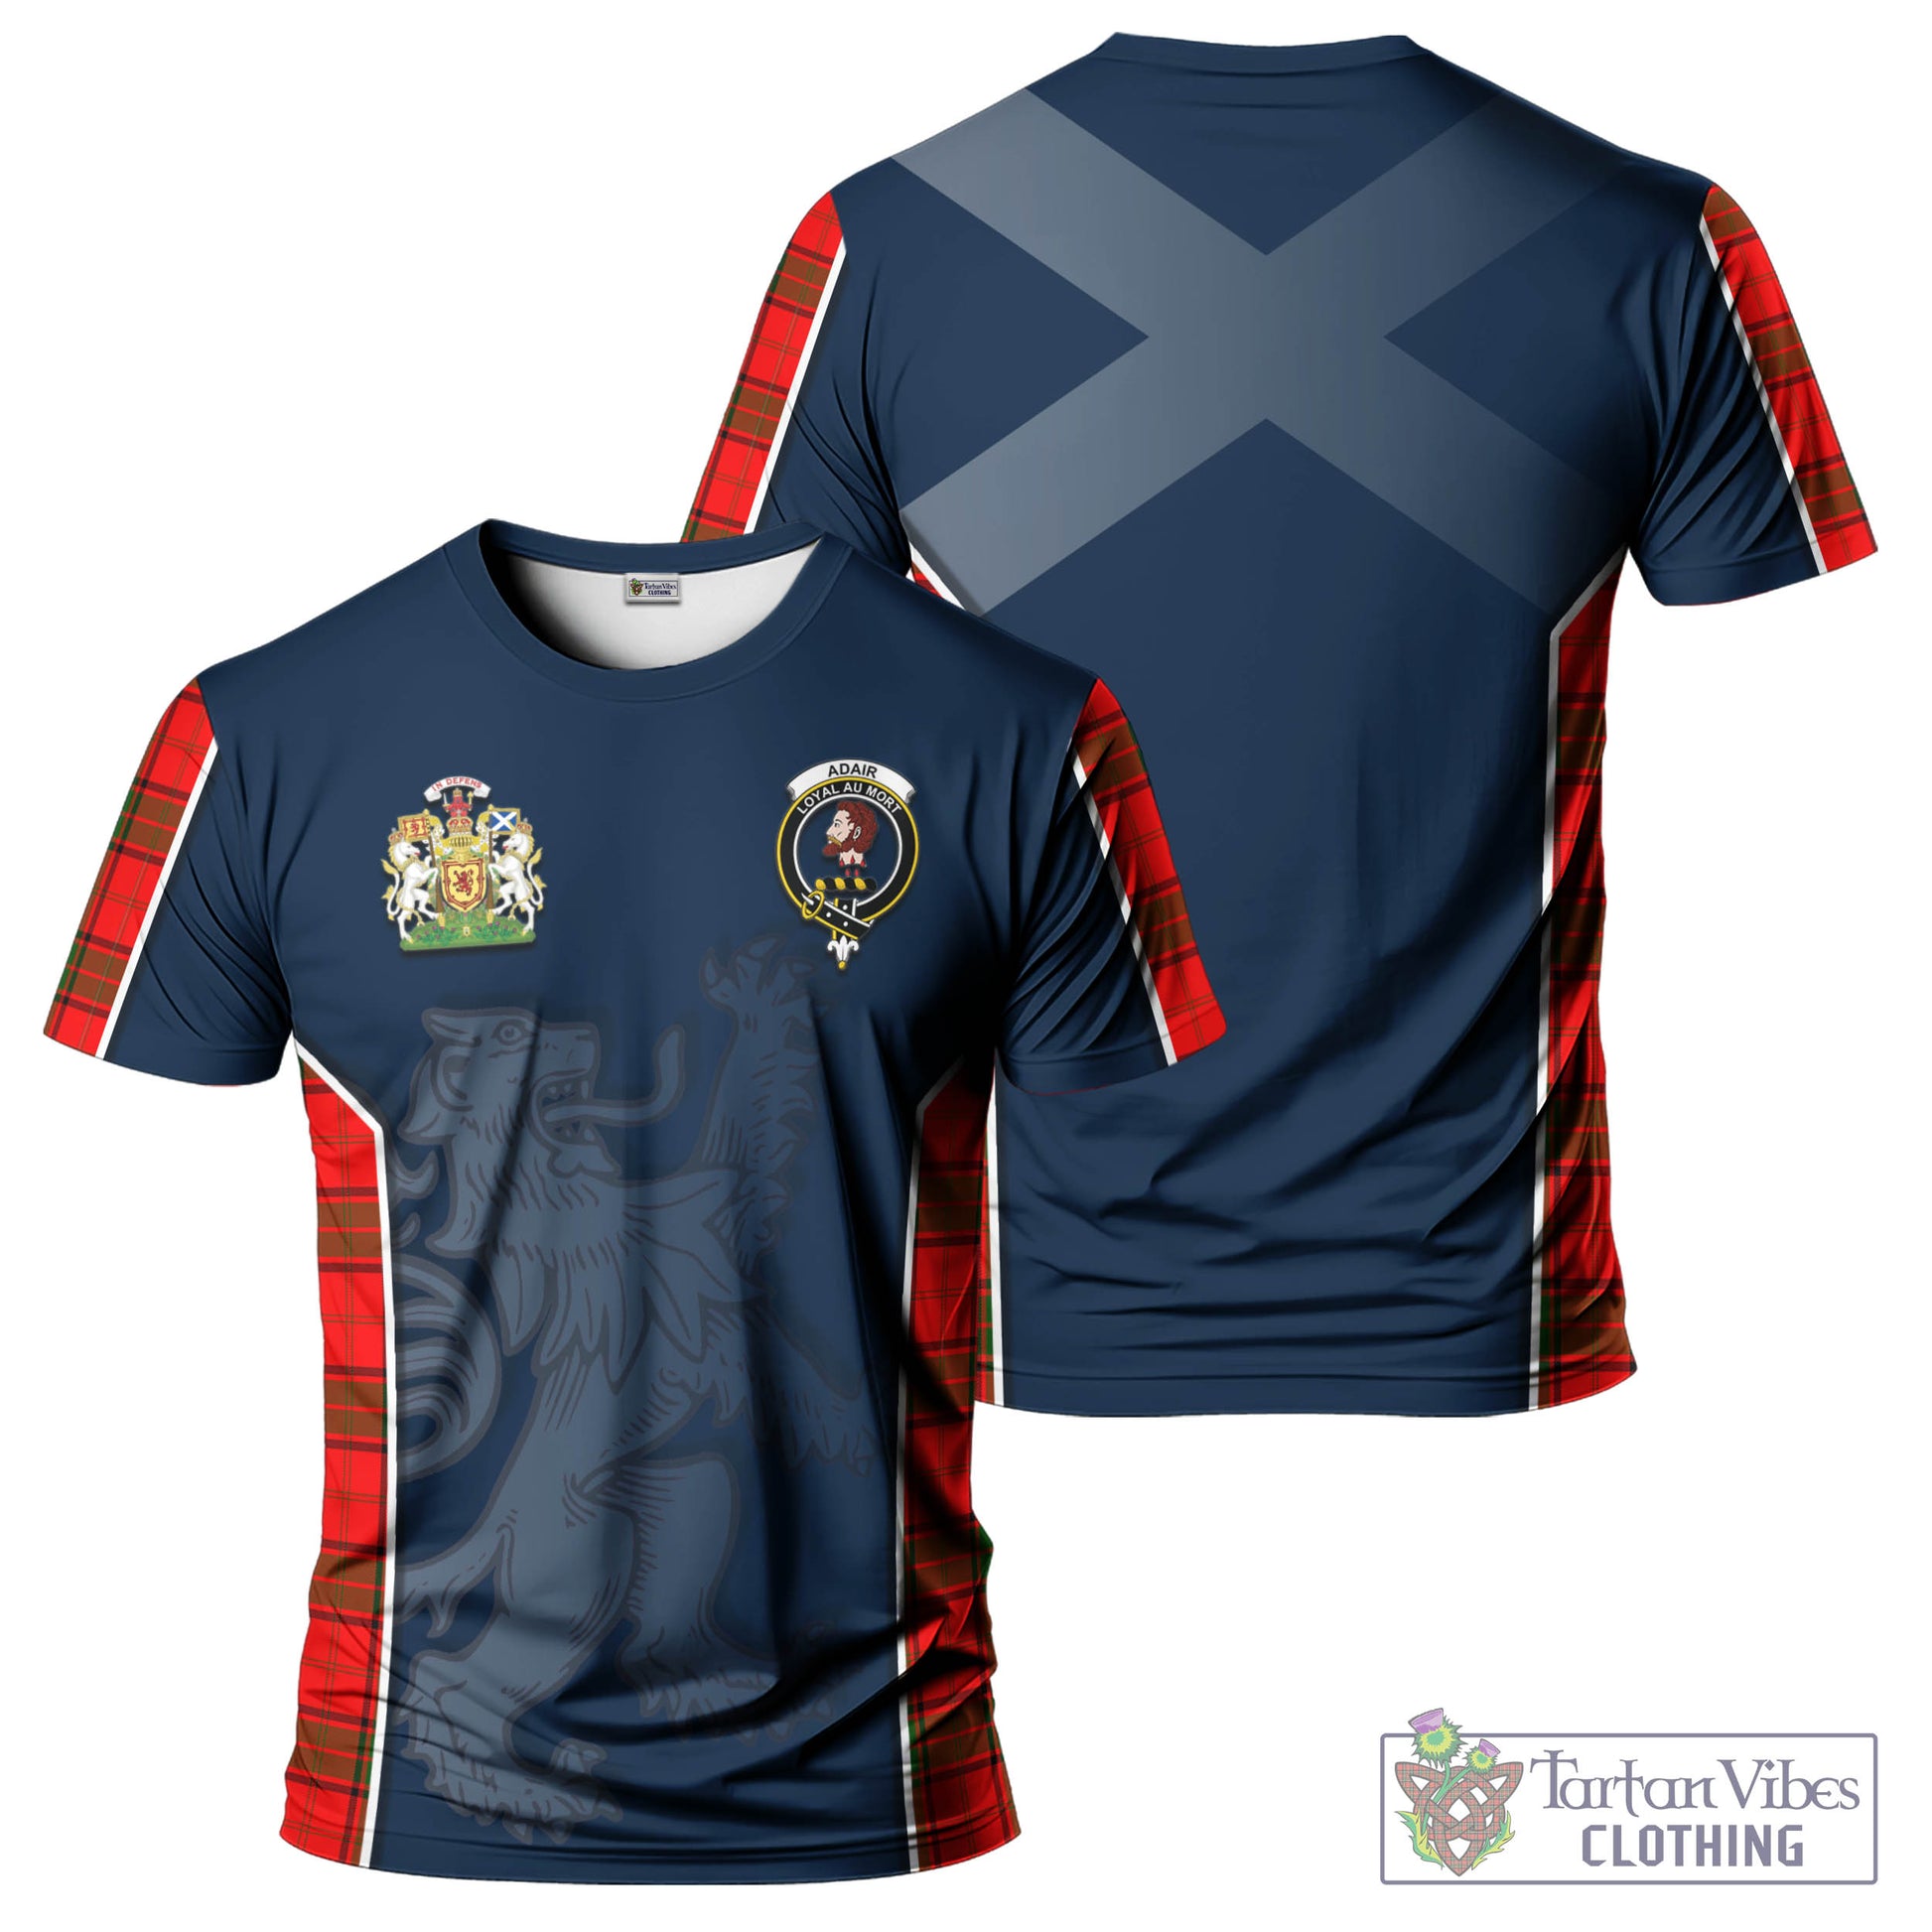 Tartan Vibes Clothing Adair Tartan T-Shirt with Family Crest and Lion Rampant Vibes Sport Style